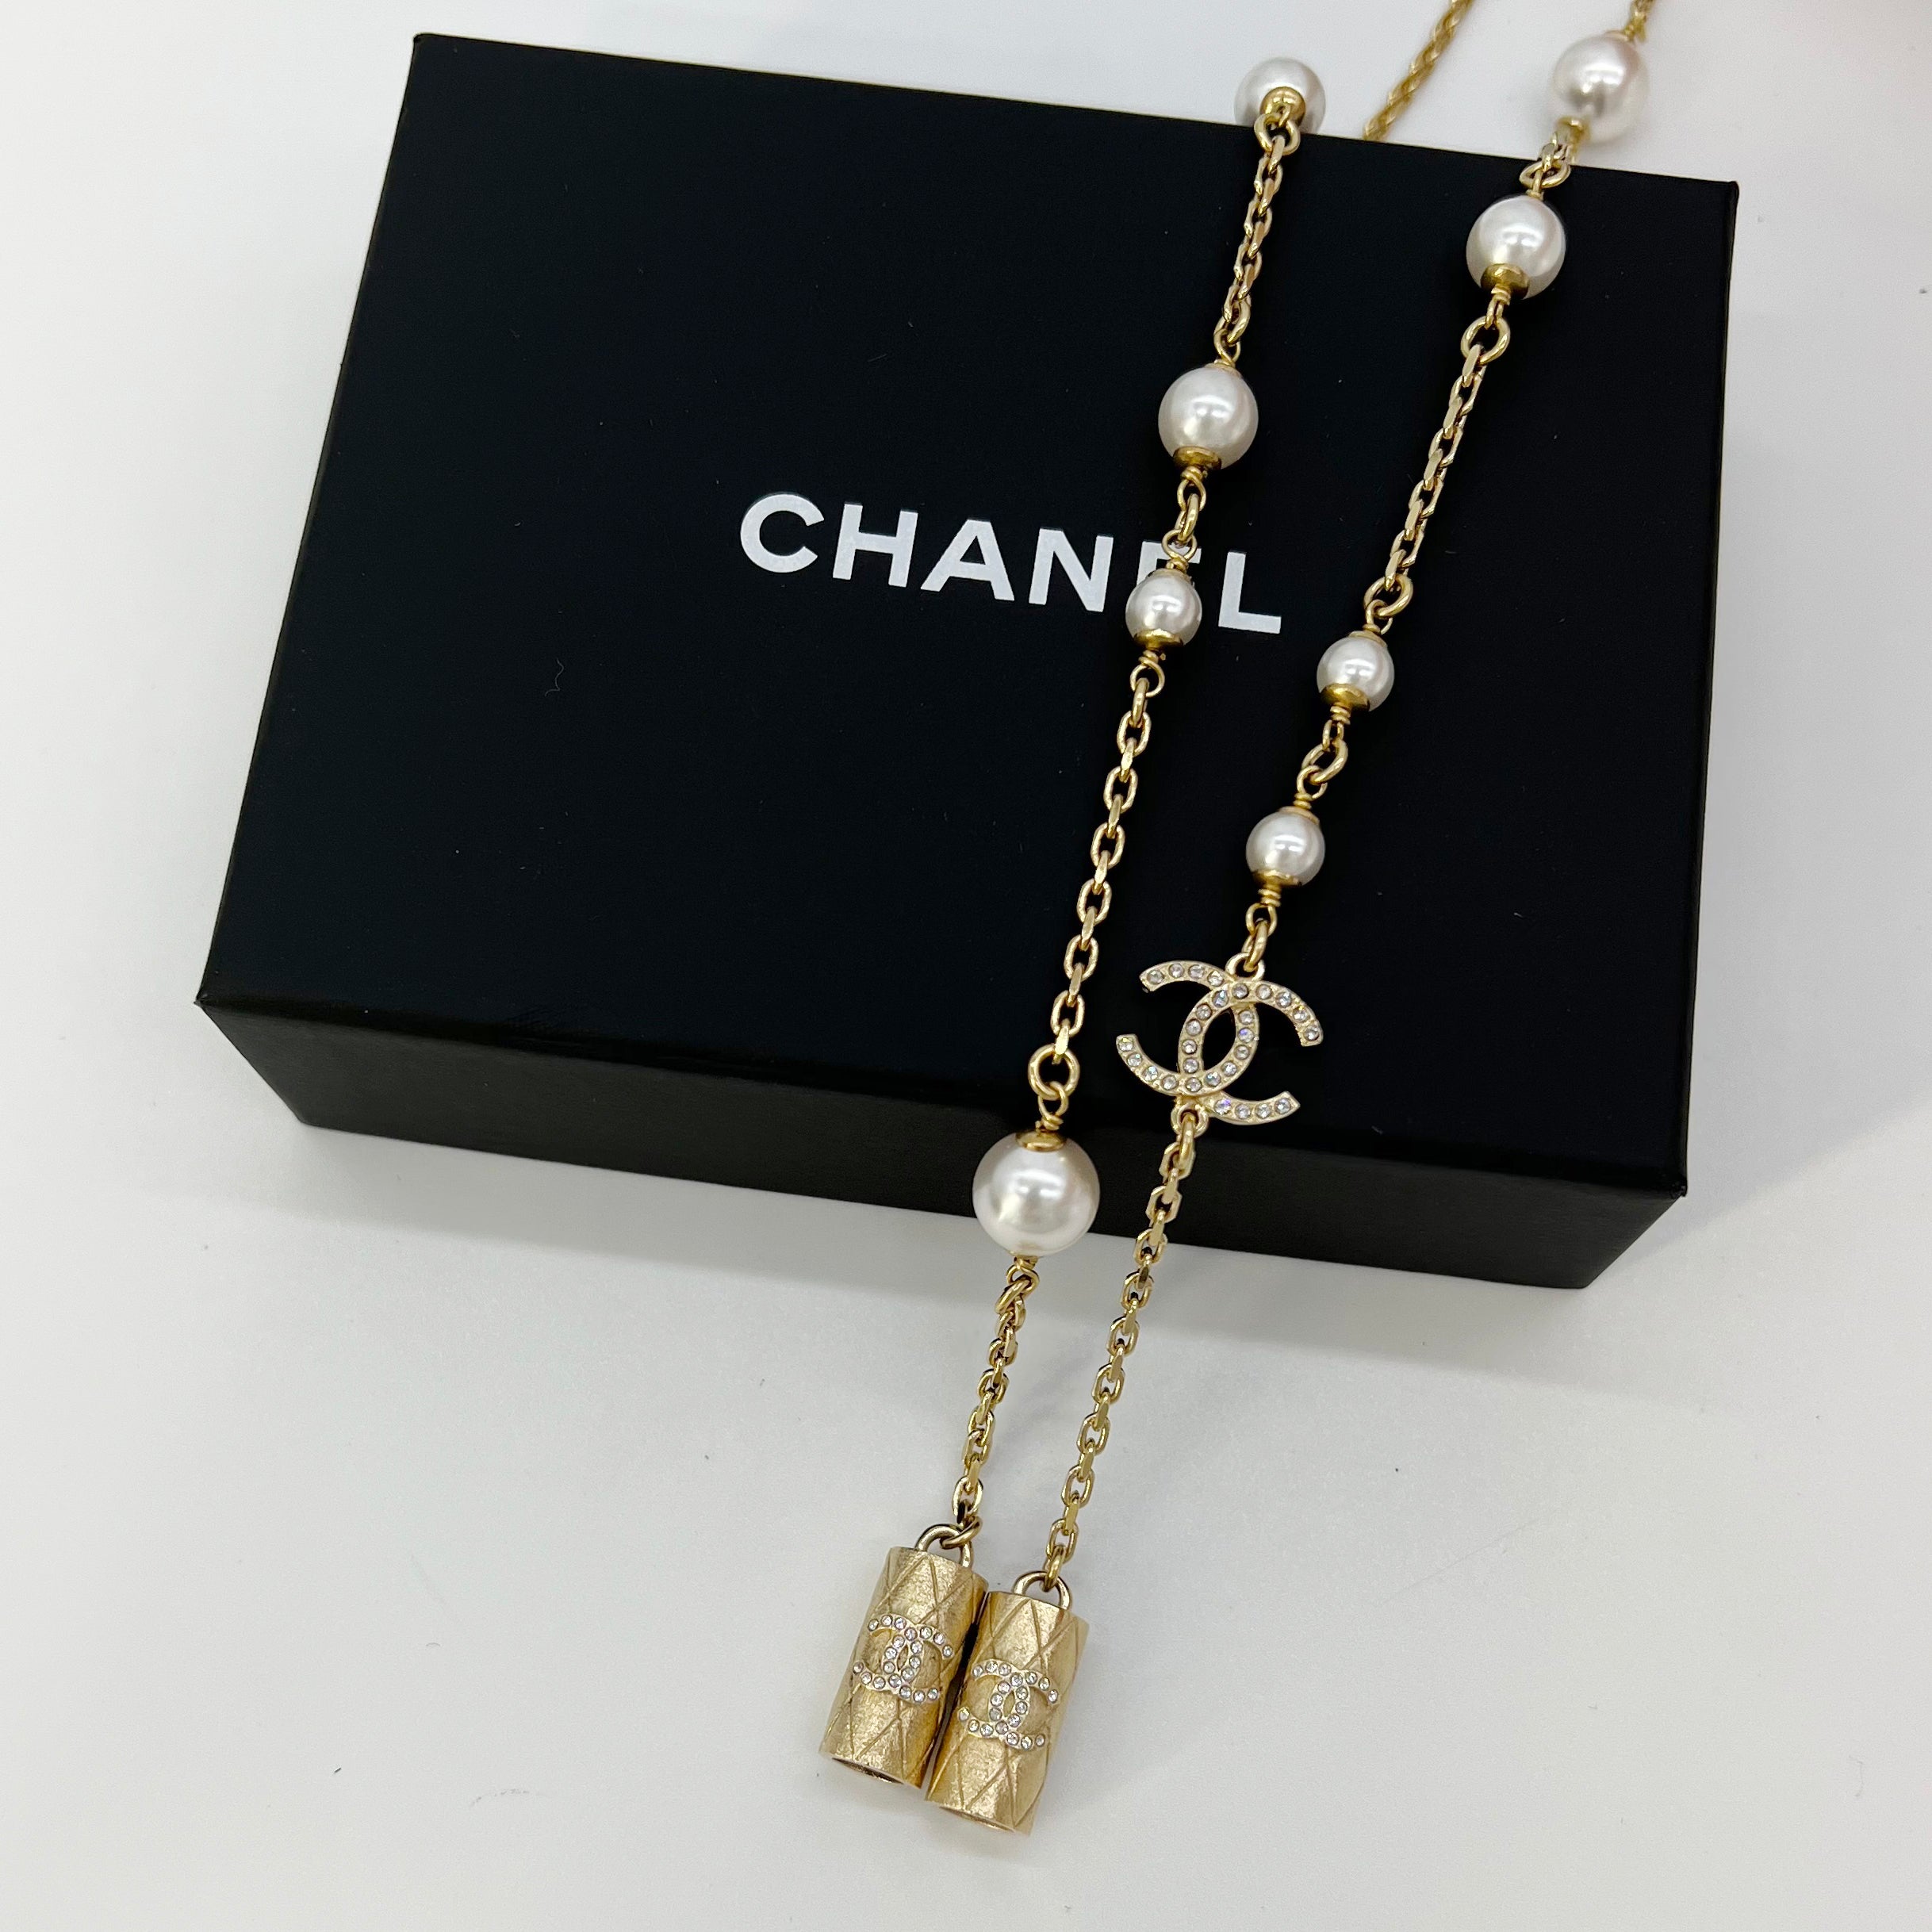 Too fab or too far? Chanel's pearl necklace Apple AirPods case vs NBA x Louis  Vuitton's US$4,500 basketball handbag – the new luxury accessory collabs  this month